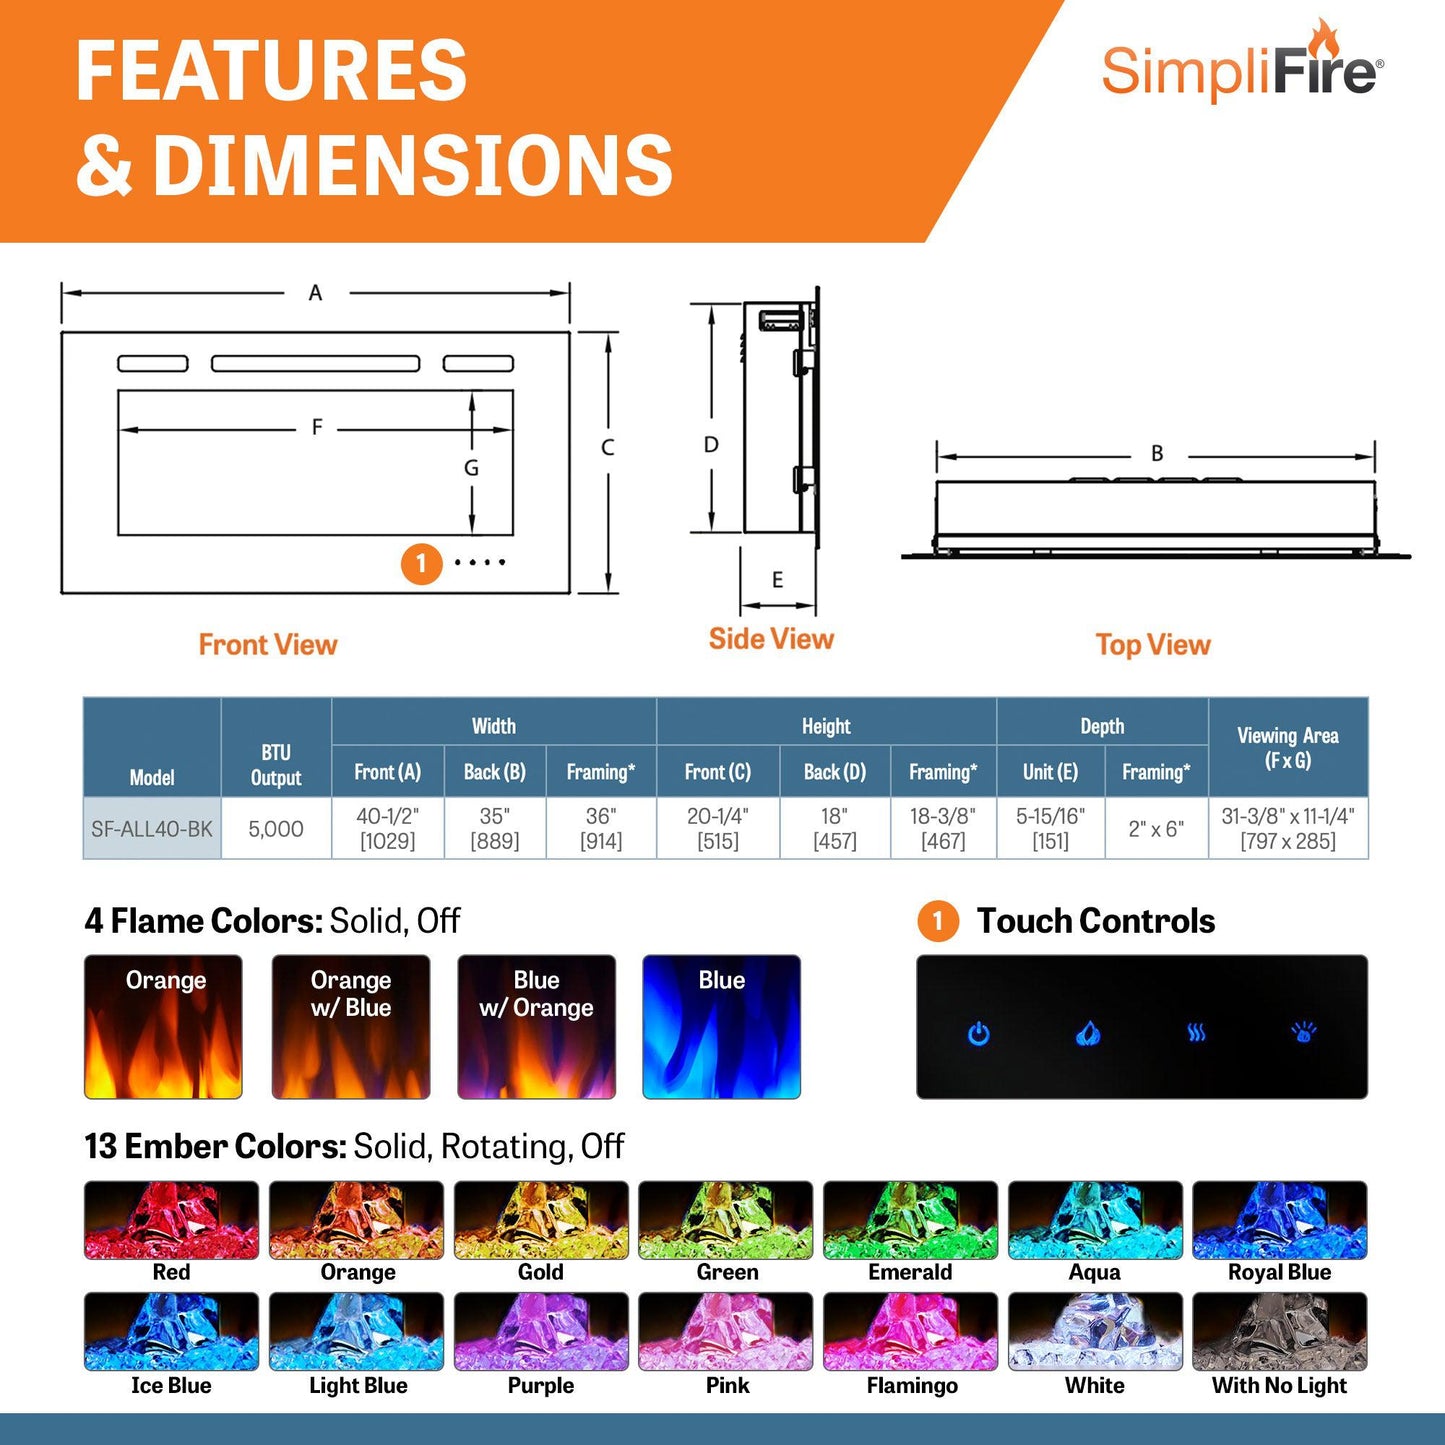 SimpliFire Allusion 40" Linear Electric Recessed Fireplace